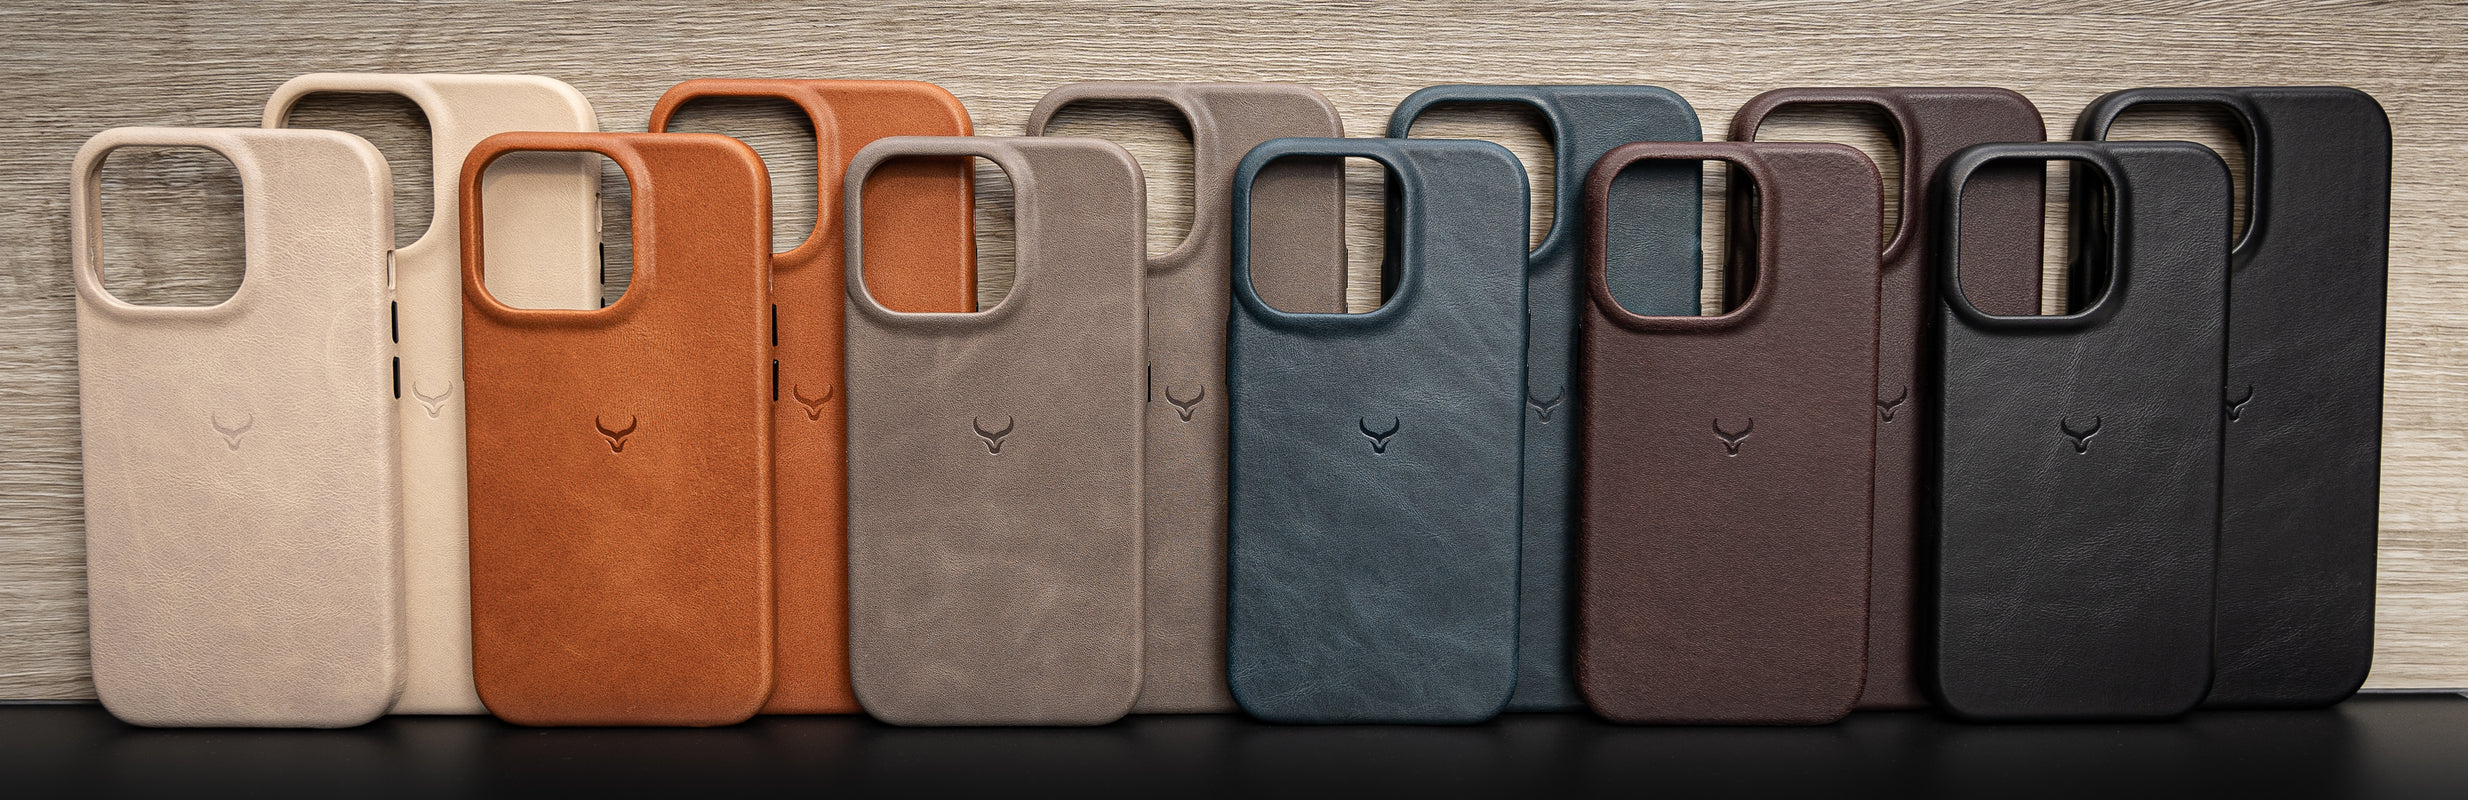 iphone leather cover in various colors